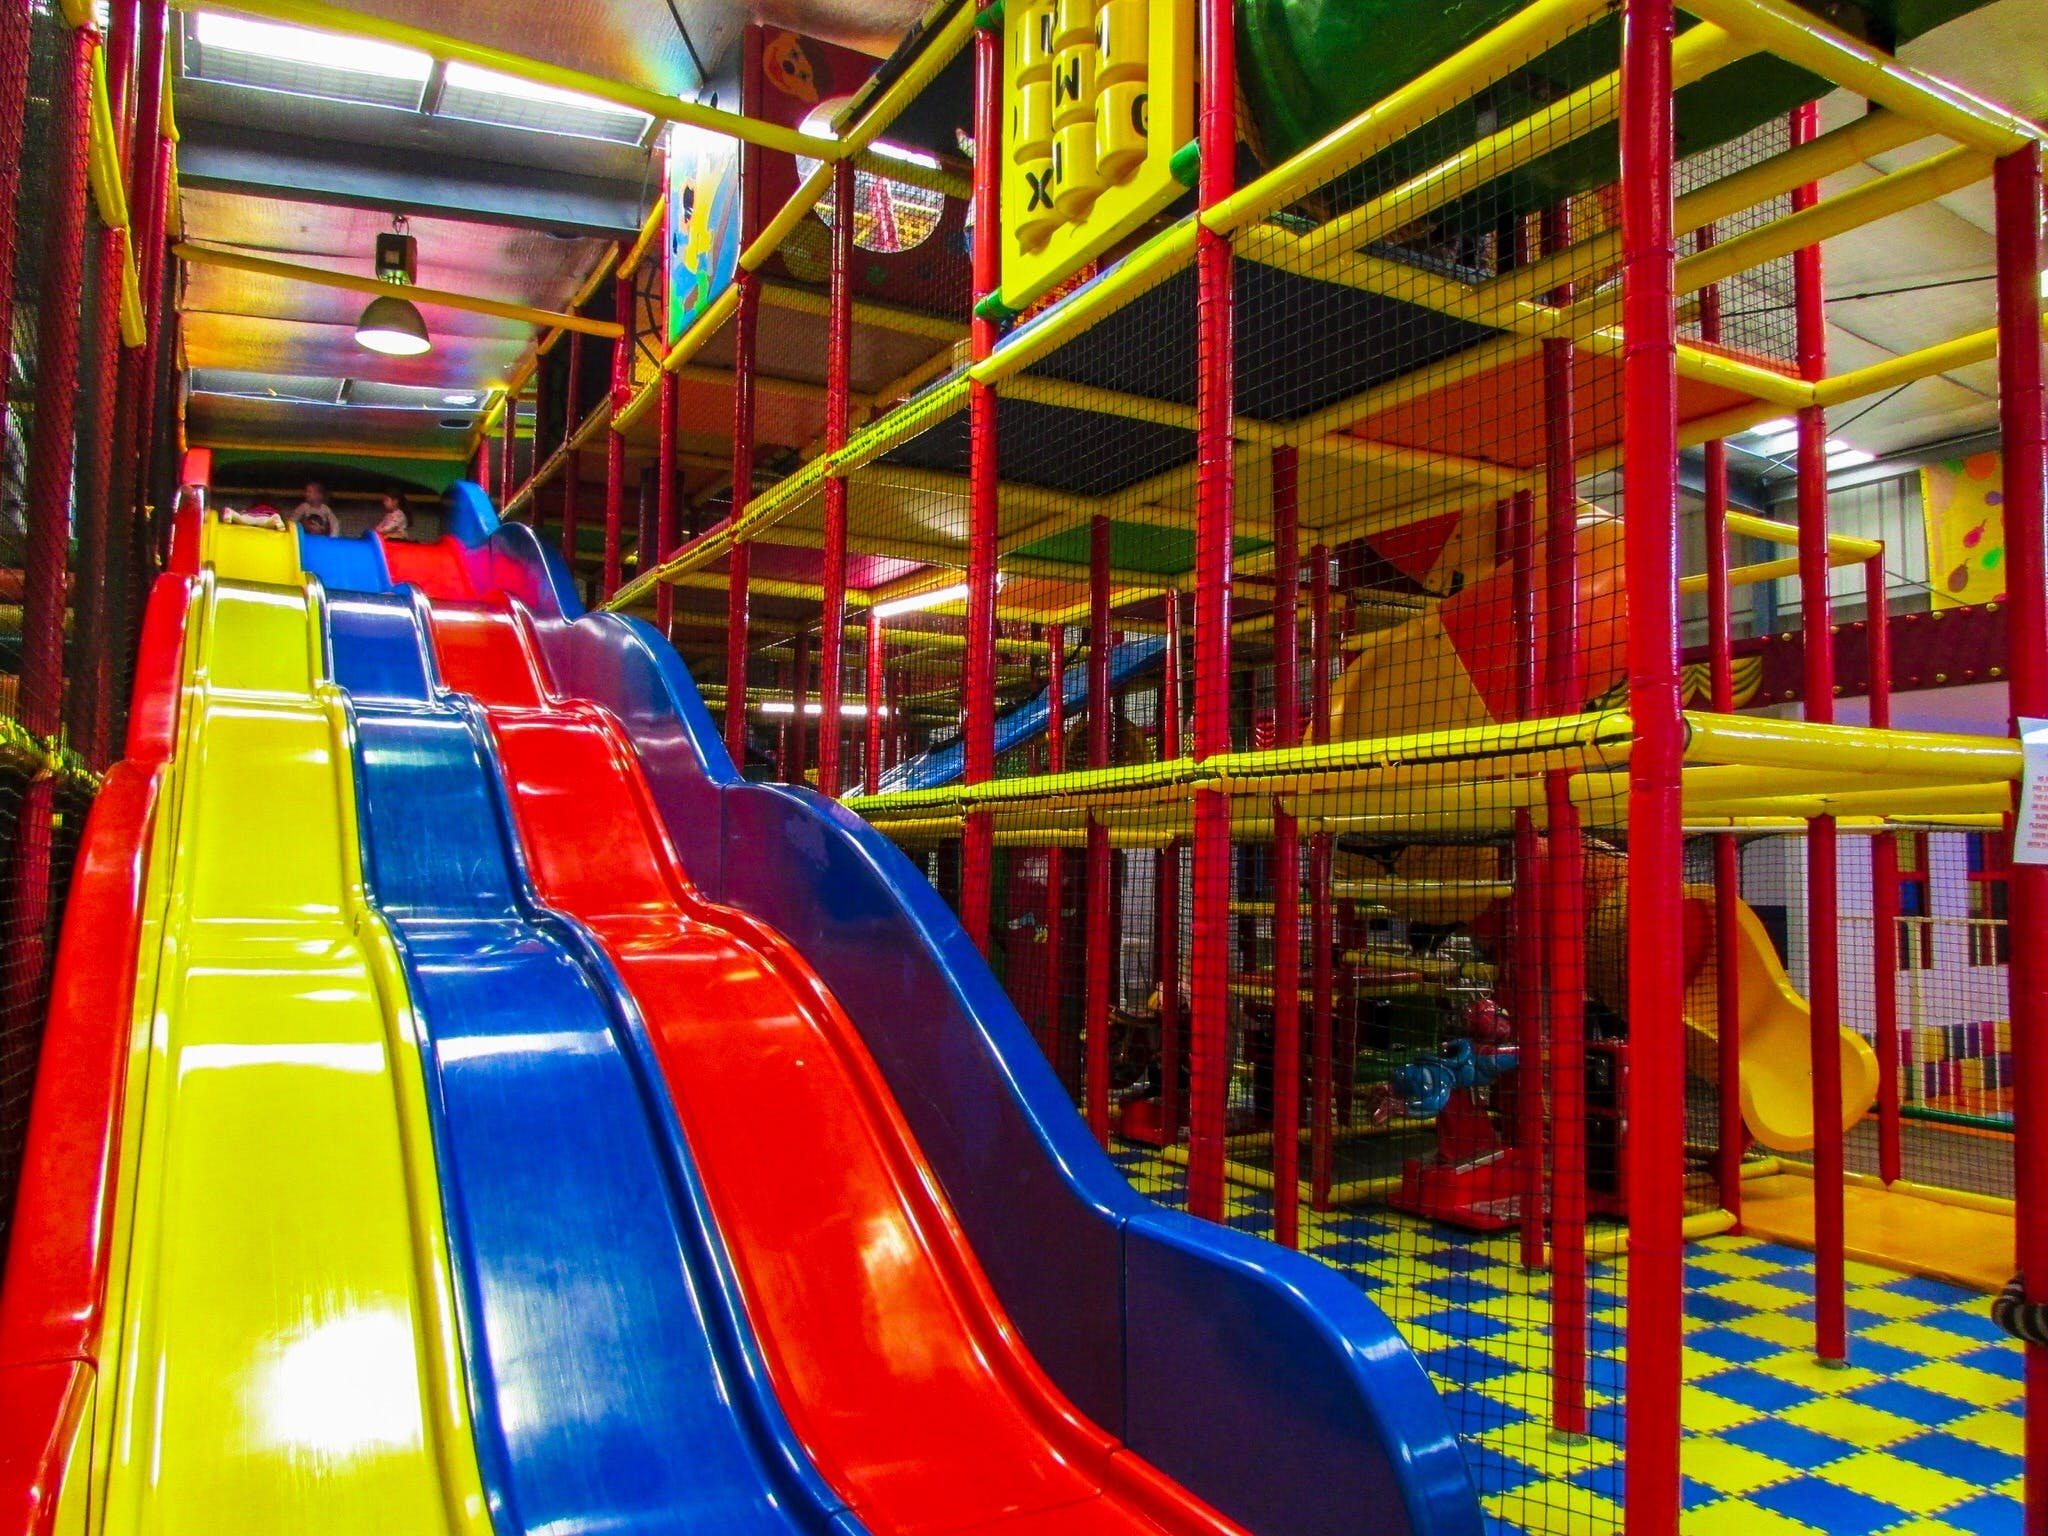 Kidz Shed Indoor Play Centre and Cafe - Accommodation in Surfers Paradise